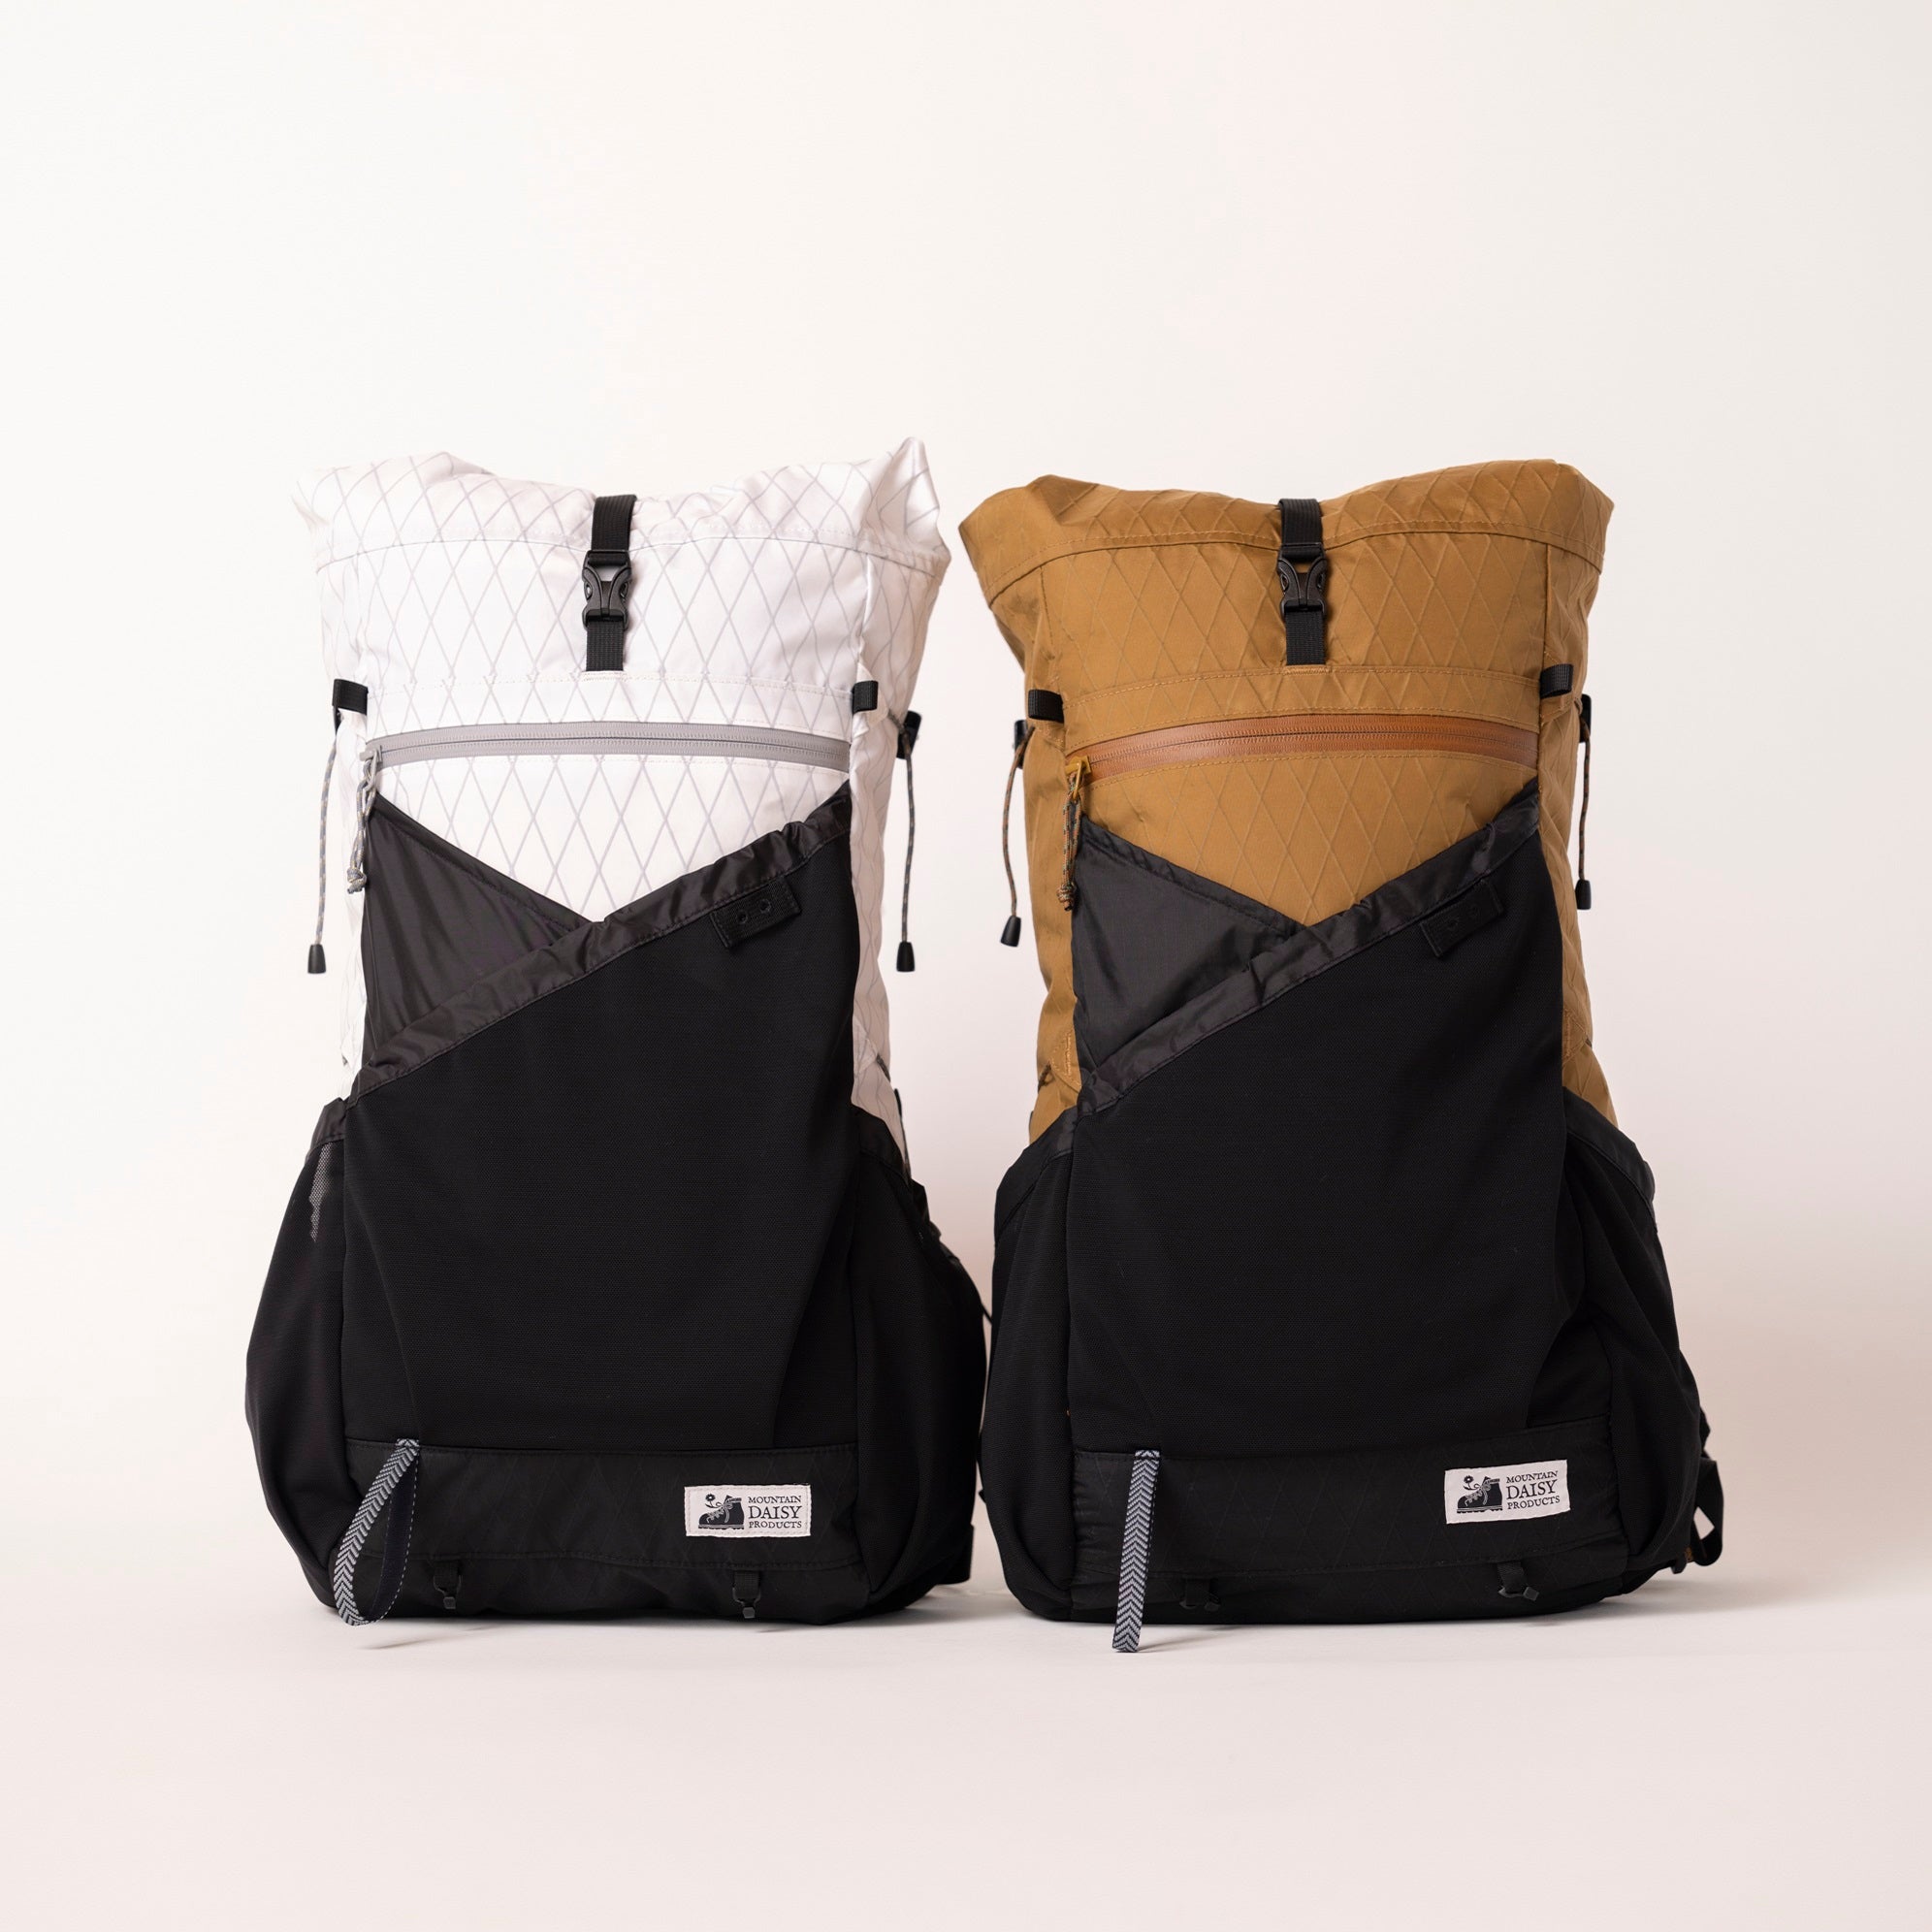 MOUNTAIN DAISY PRODUCTS バッグパック-